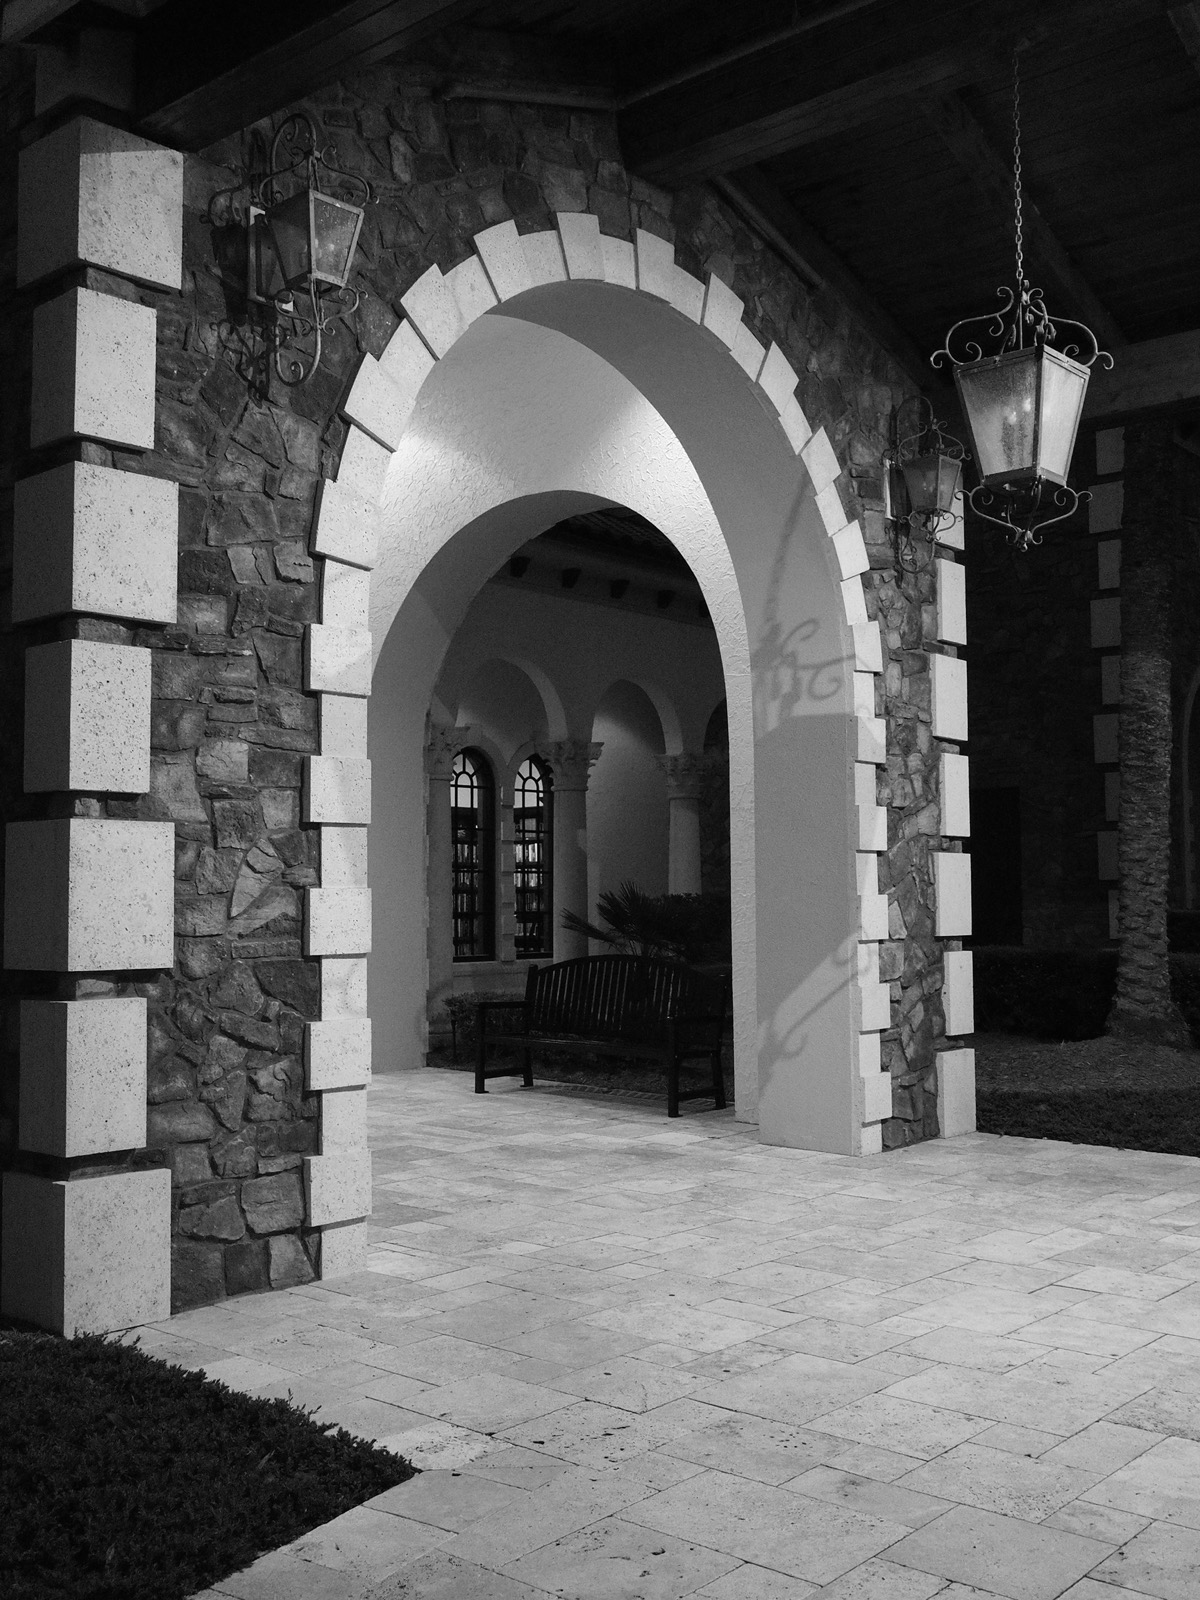 Two arches framed in an arch, framed in an arch in alternating orthogonal planes. B&W.